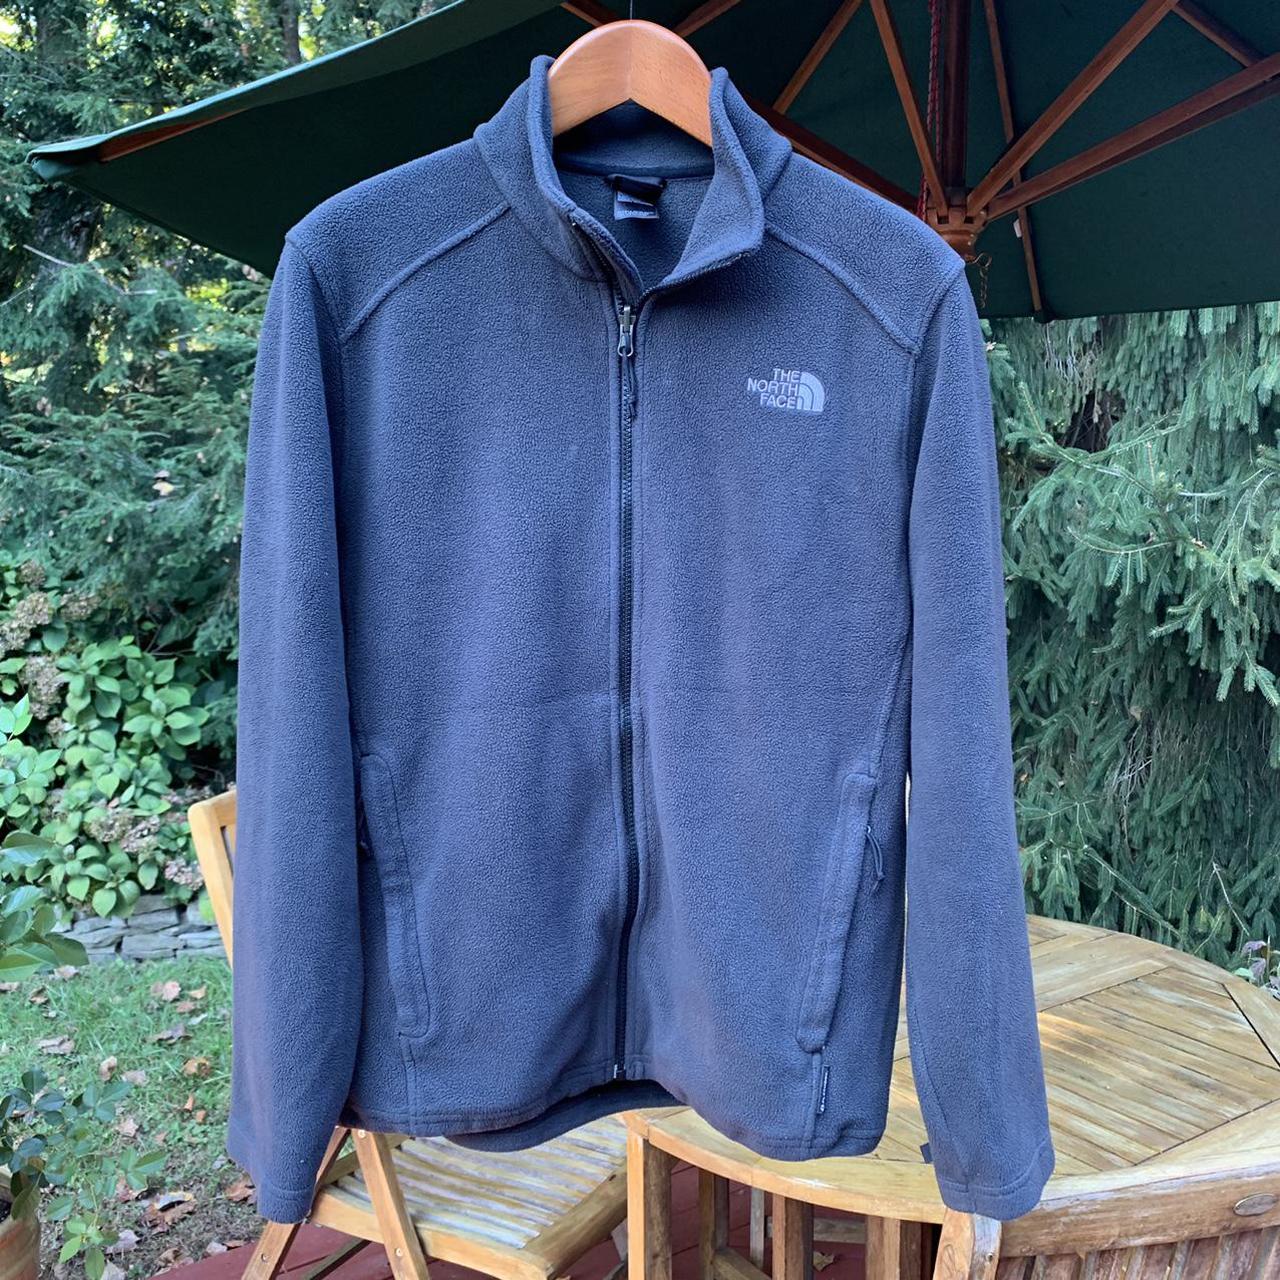 Product Image 2 - North Face fleece. FREE SHIPPING!